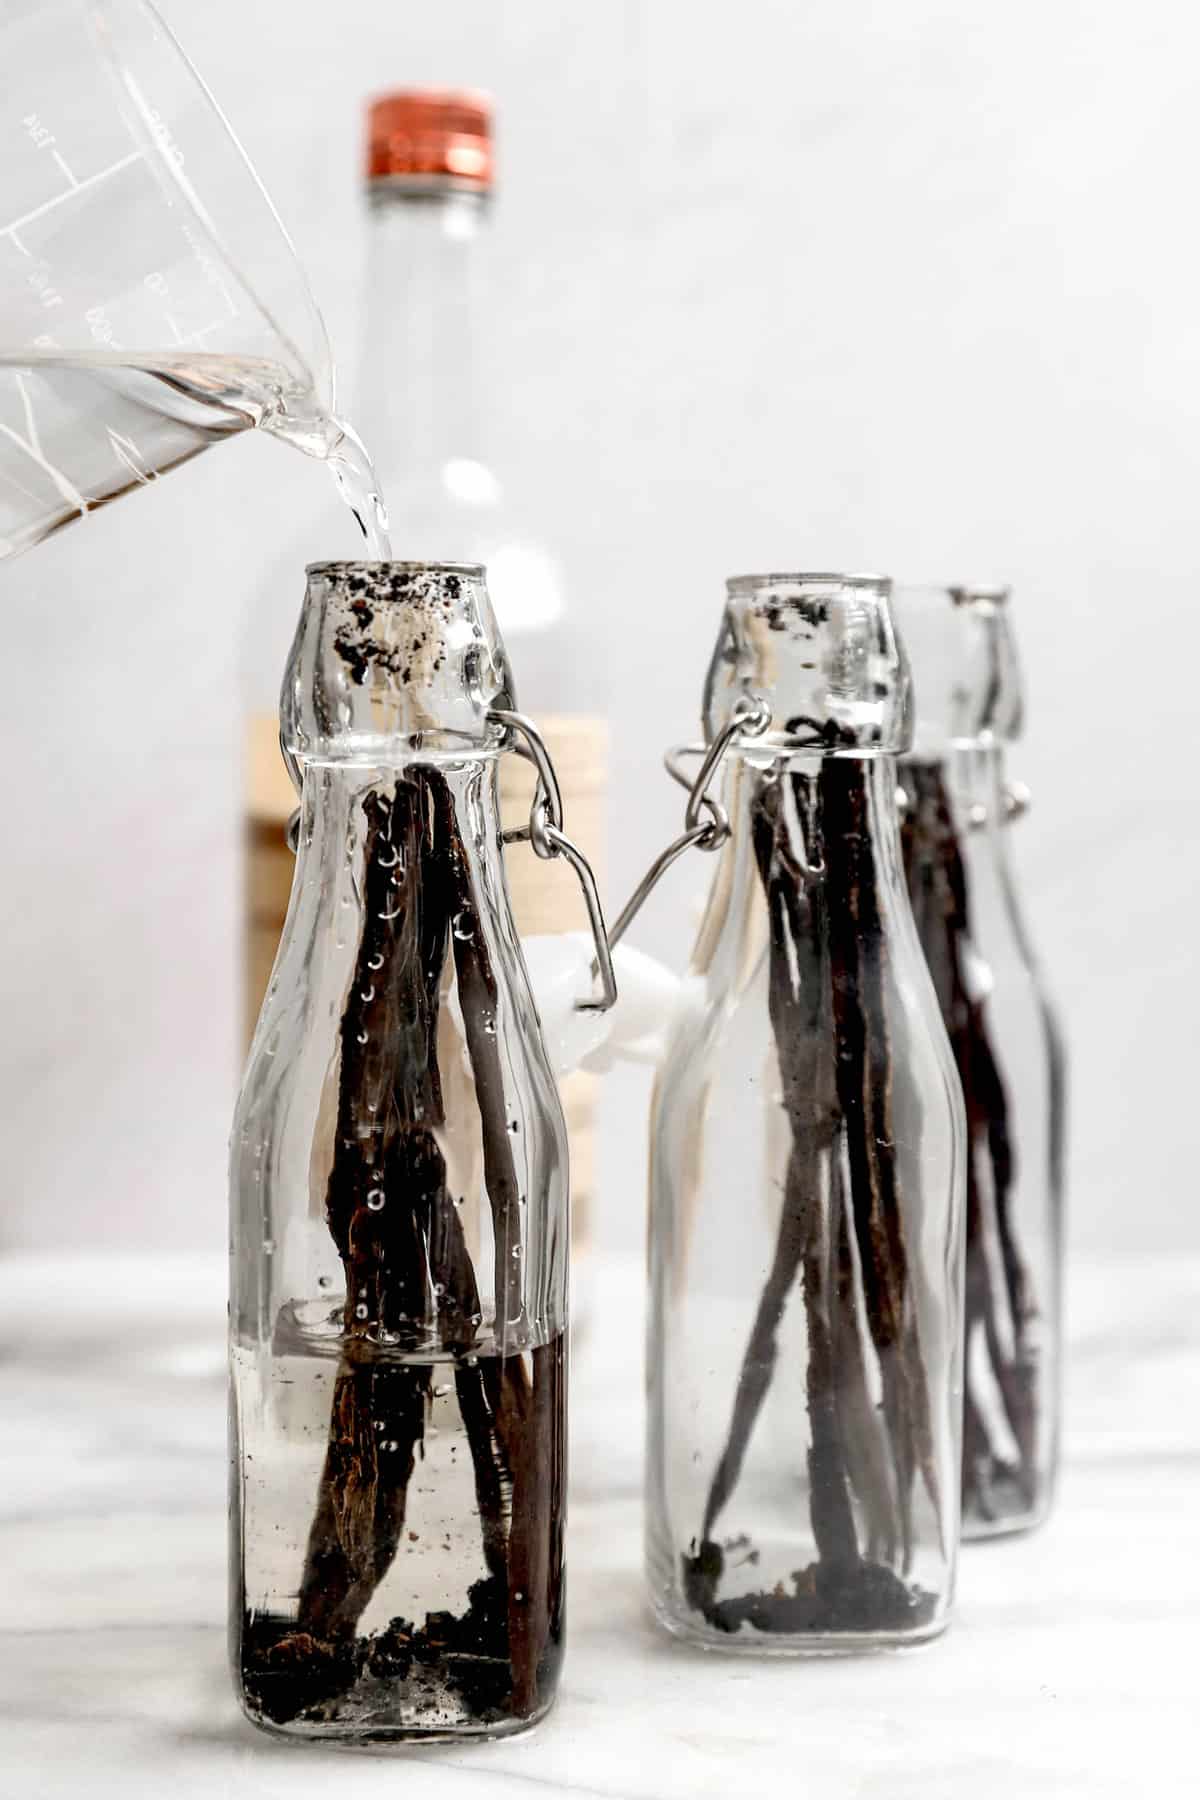 6 Reasons Why You Should Buy Milk in Glass Bottles